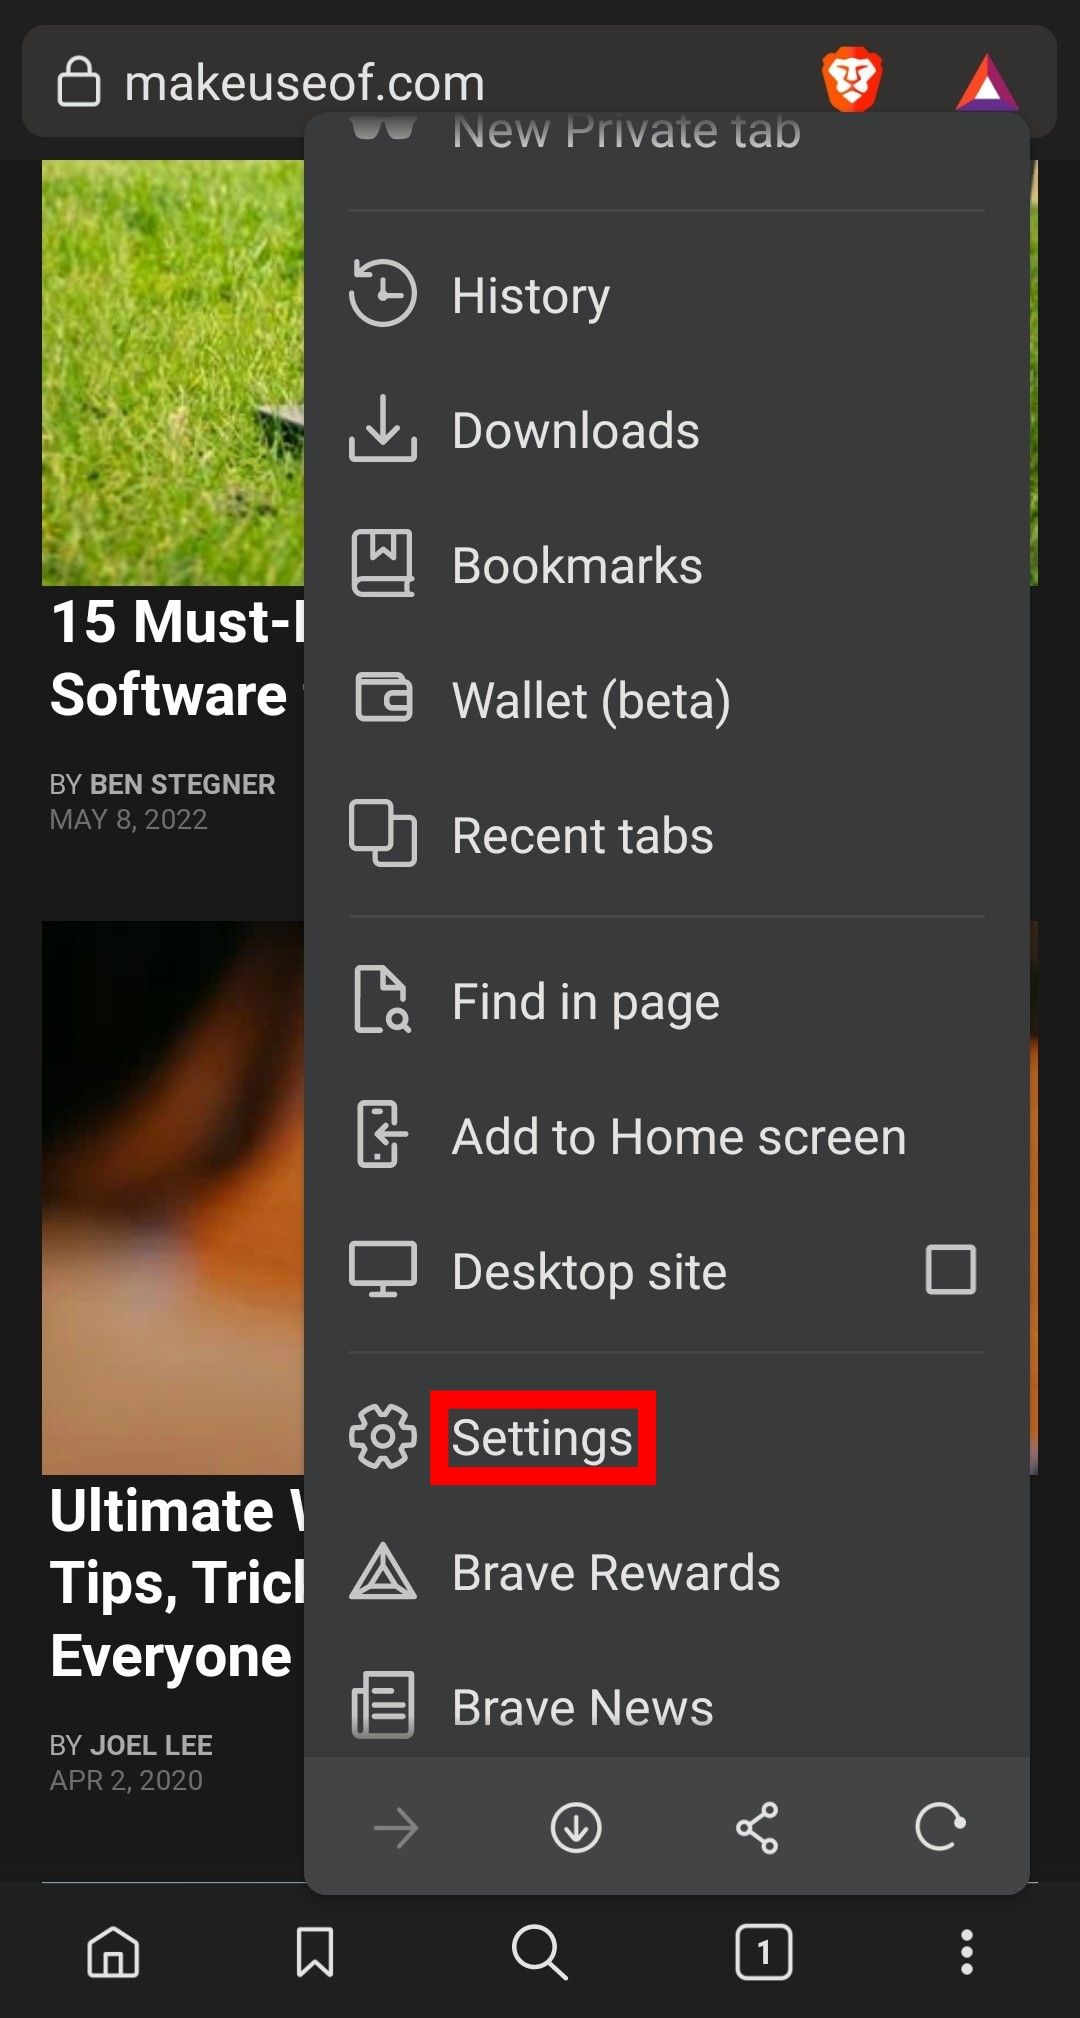 Setting menu button on Brave Android